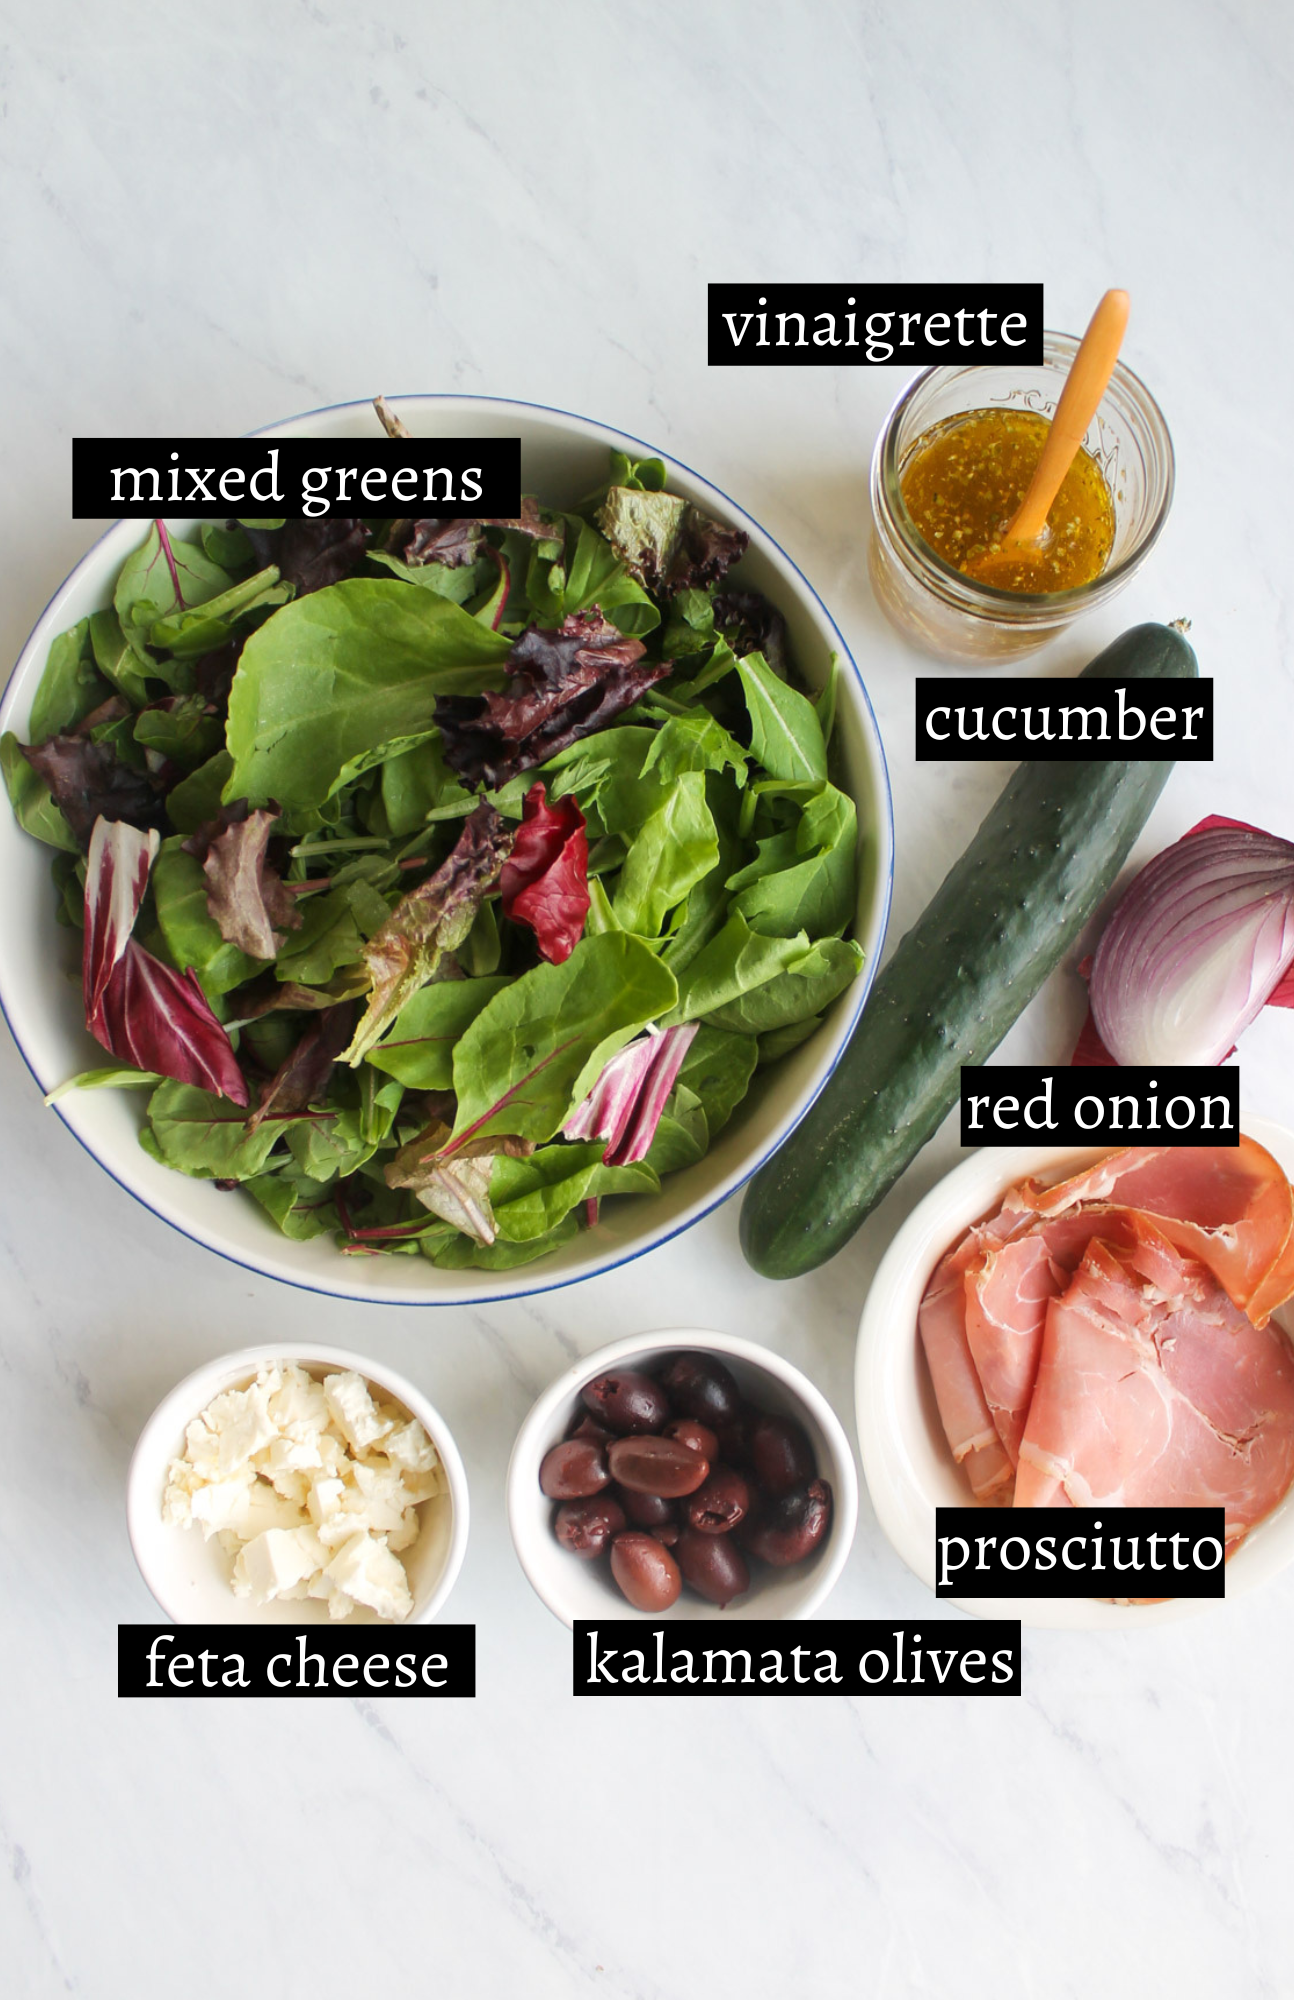 Labeled ingredients for Italian mixed greens salad with crispy prosciutto.